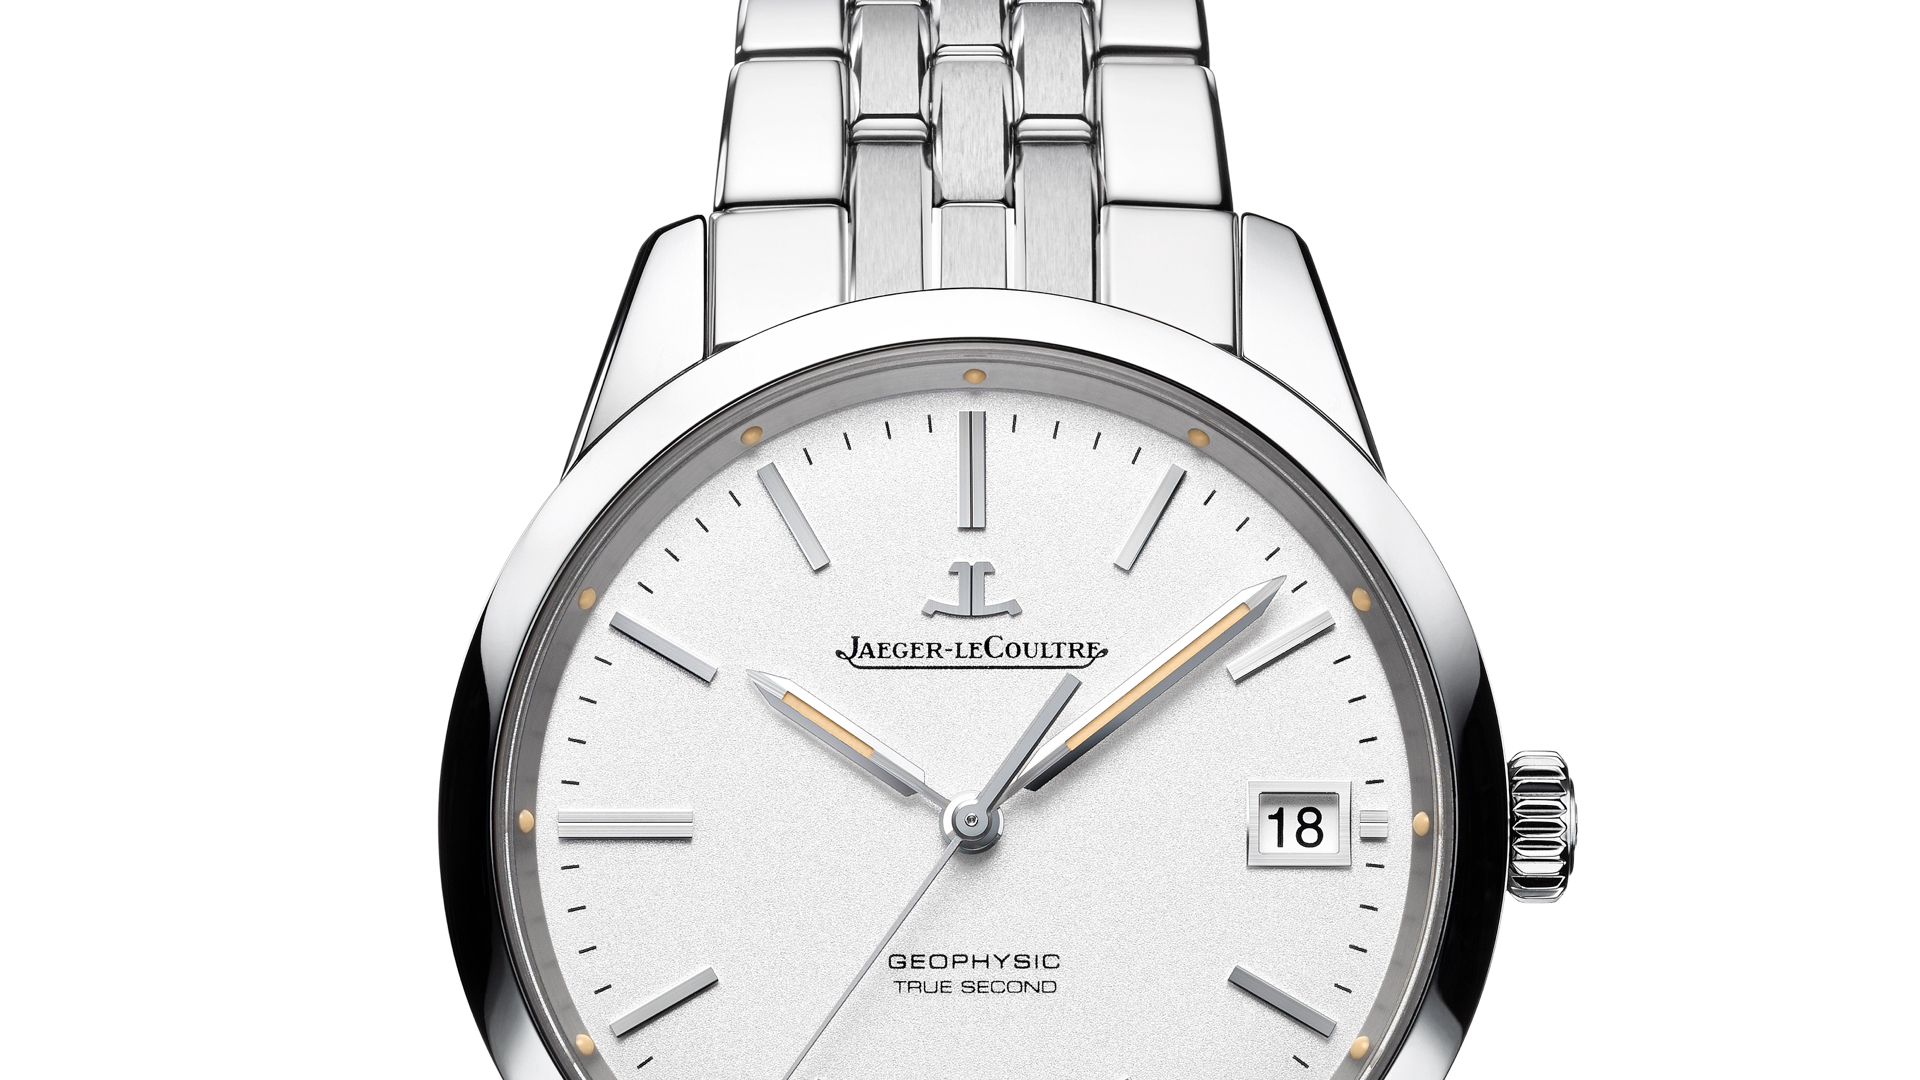 JAEGERLECOULTRE BRINGS NEW VERSATILITY TO THE MASTER CONTROL COLLECTION  WITH TWO NEW MODELS